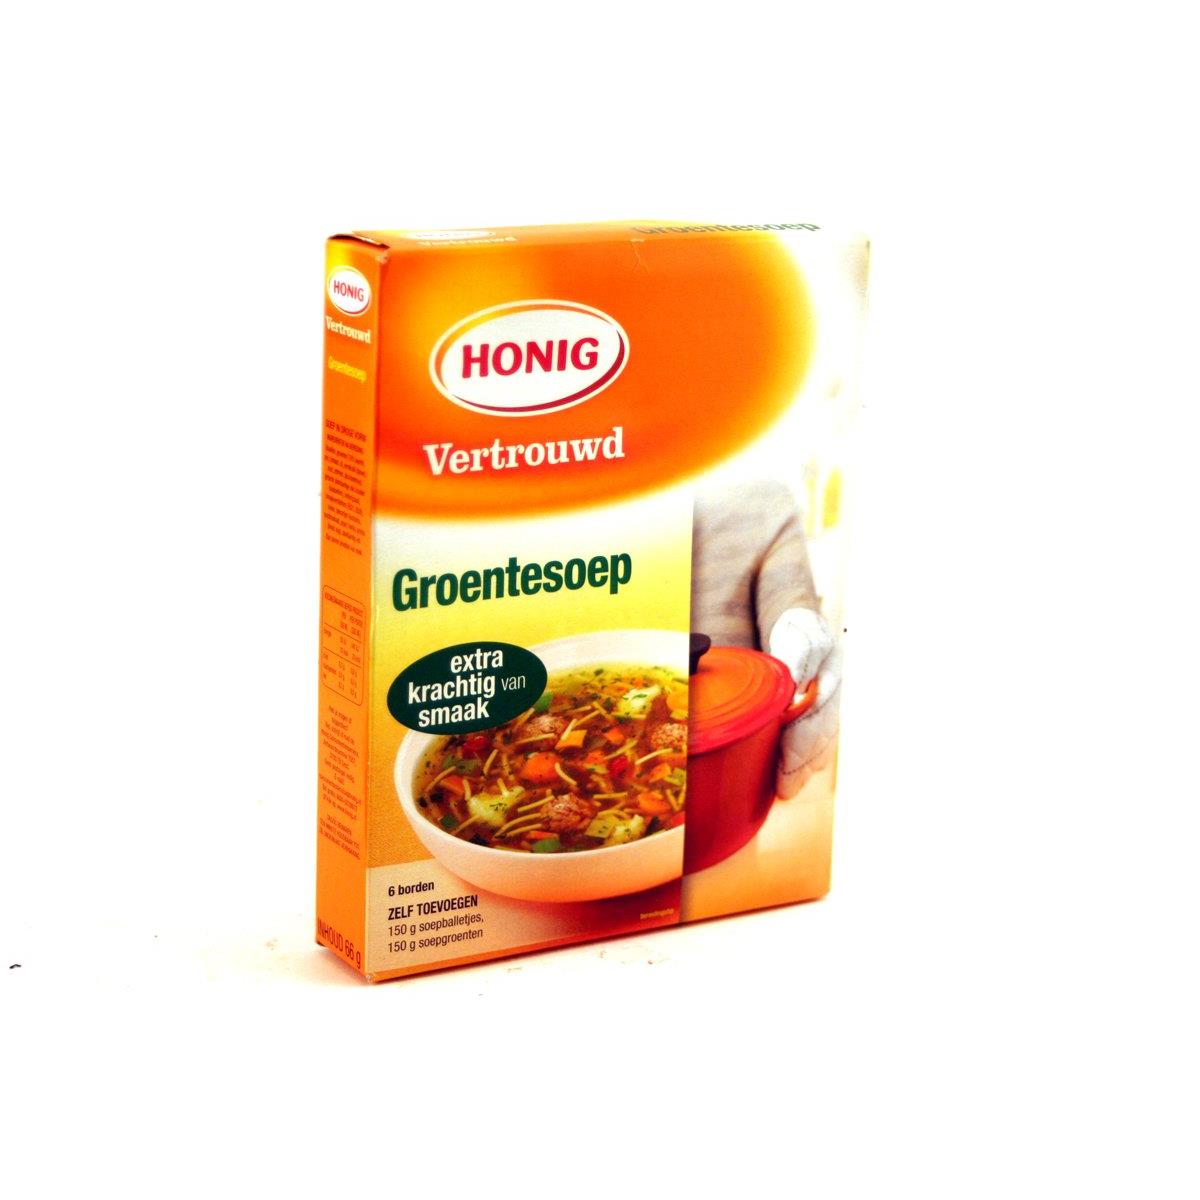 Honig Groentesoep (Dried Mix to Make Vegetable Soup) 6 Count